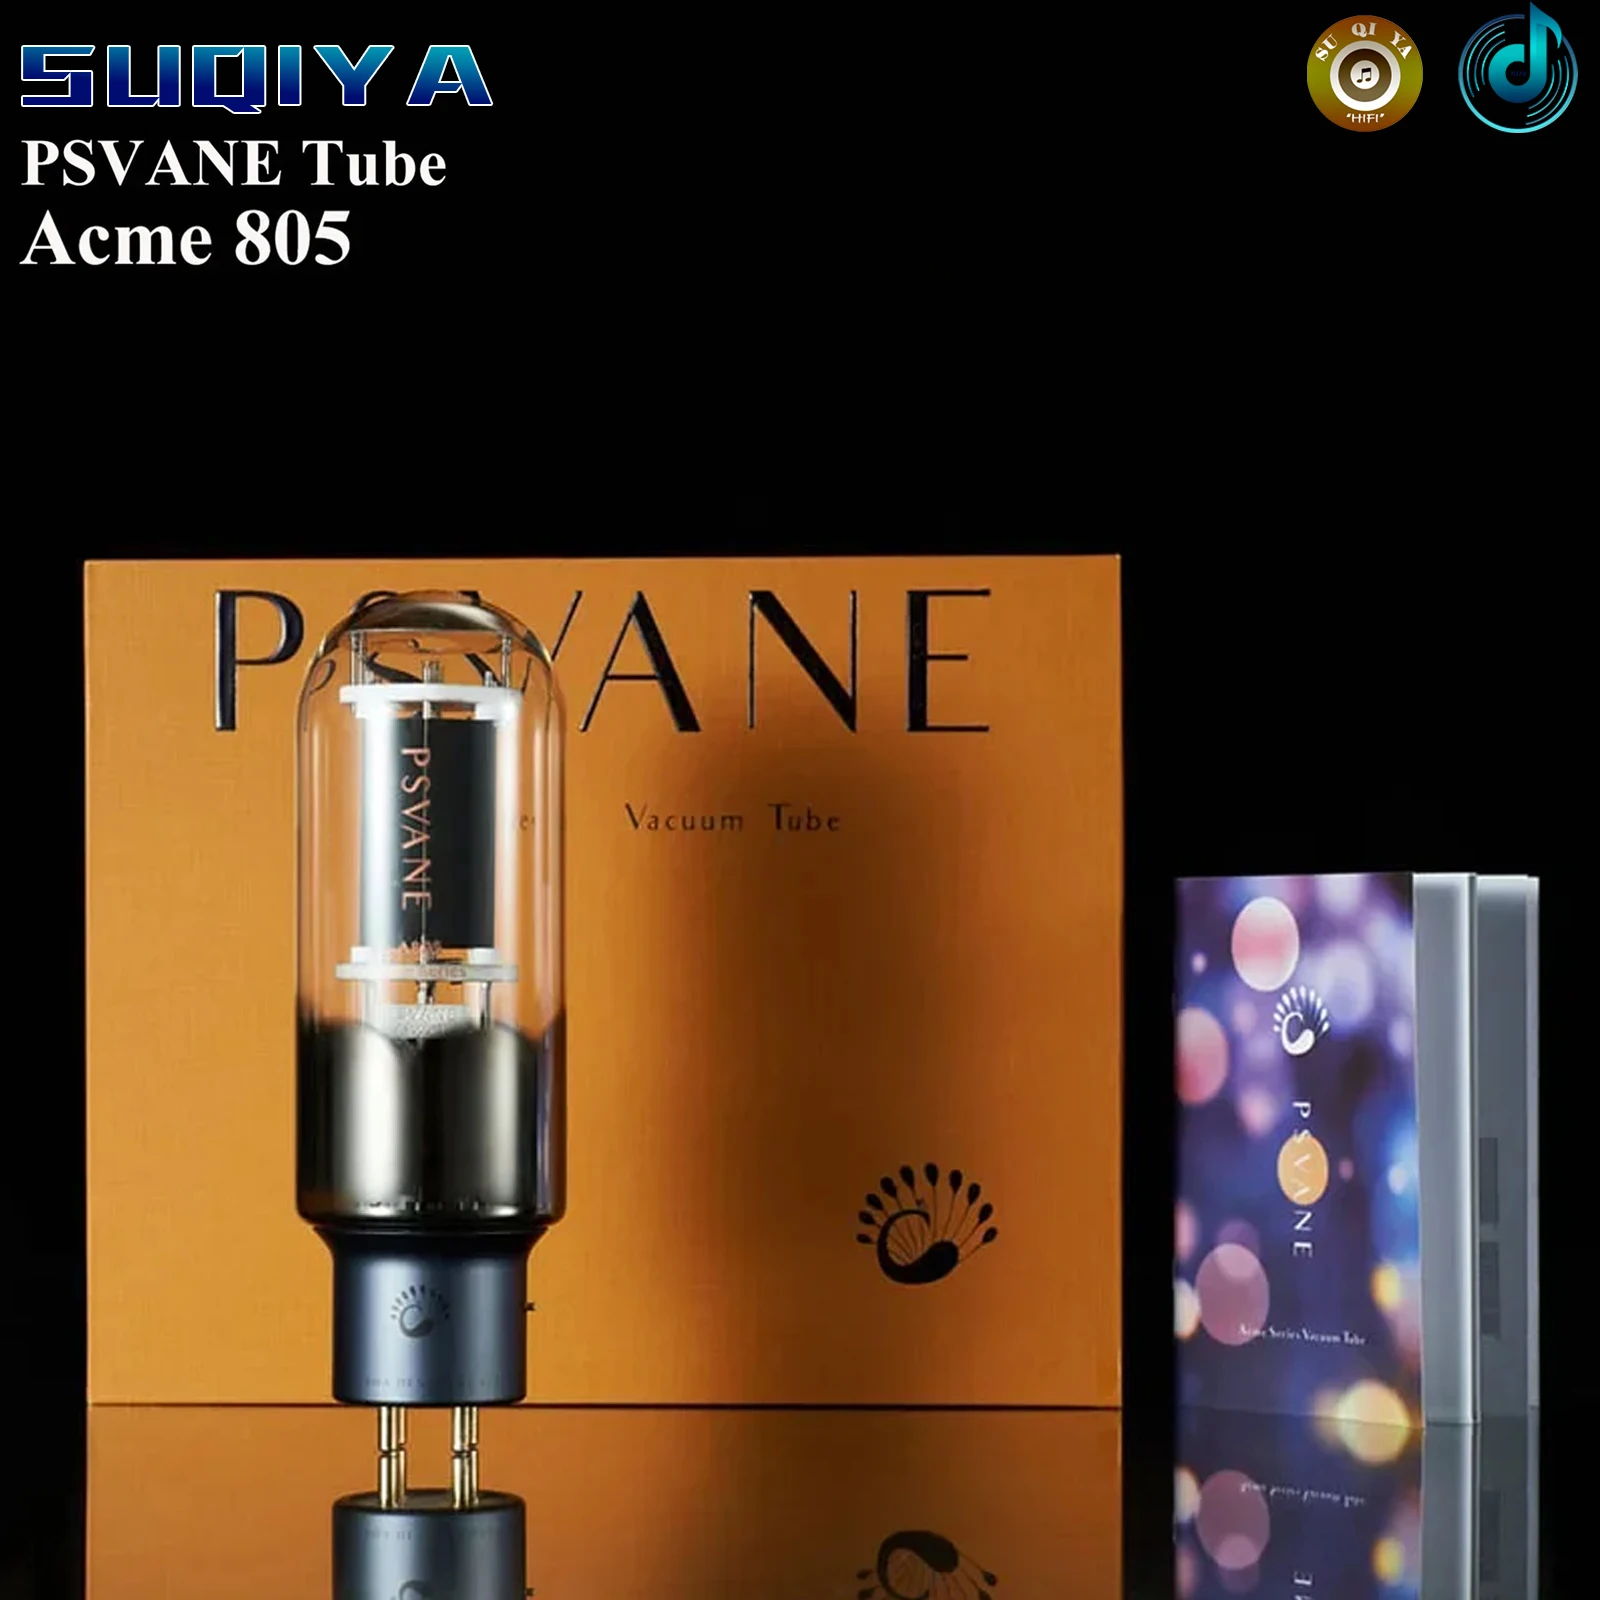 

PSVANE Tube Acme 805 Original Factory Matched Pair for Vacuum Tube Amplifier HIFI Amplifier High End Audio Amp Free Shipping